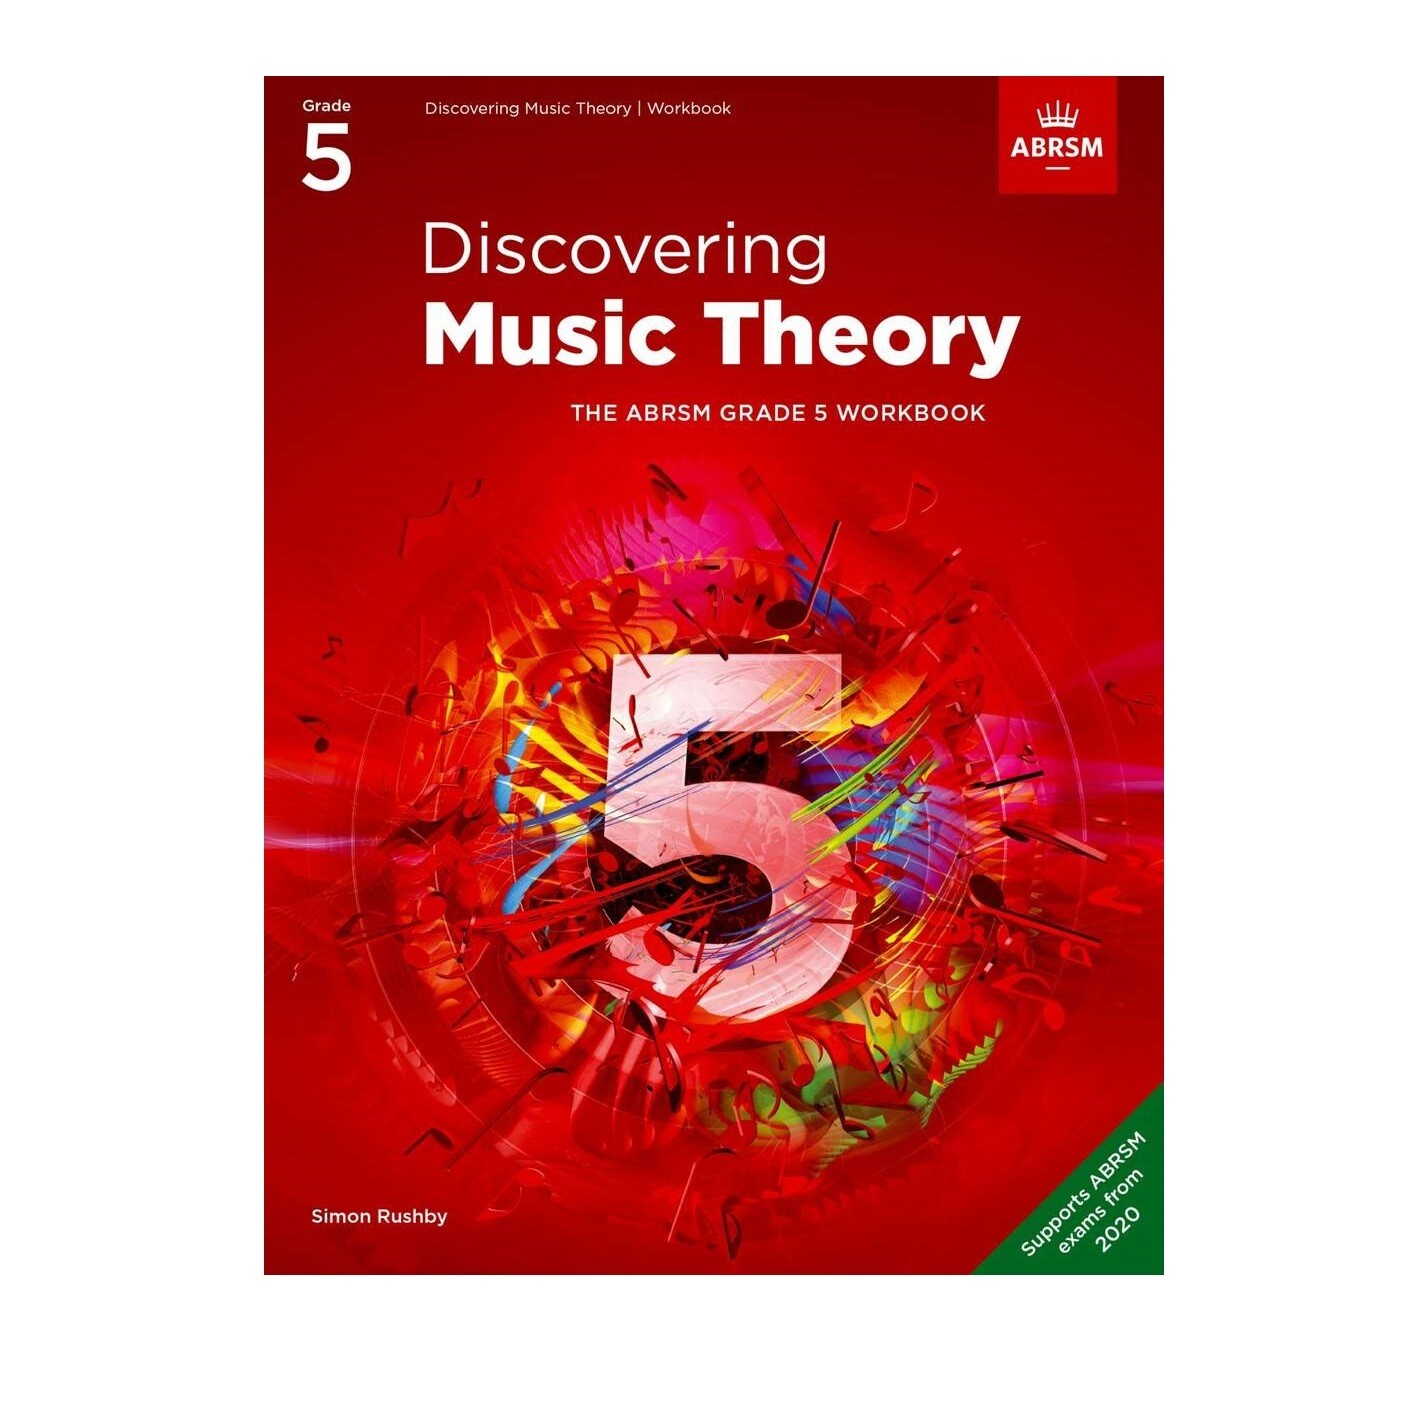 ABRSM Discovering Music Theory Book -  Grade 5